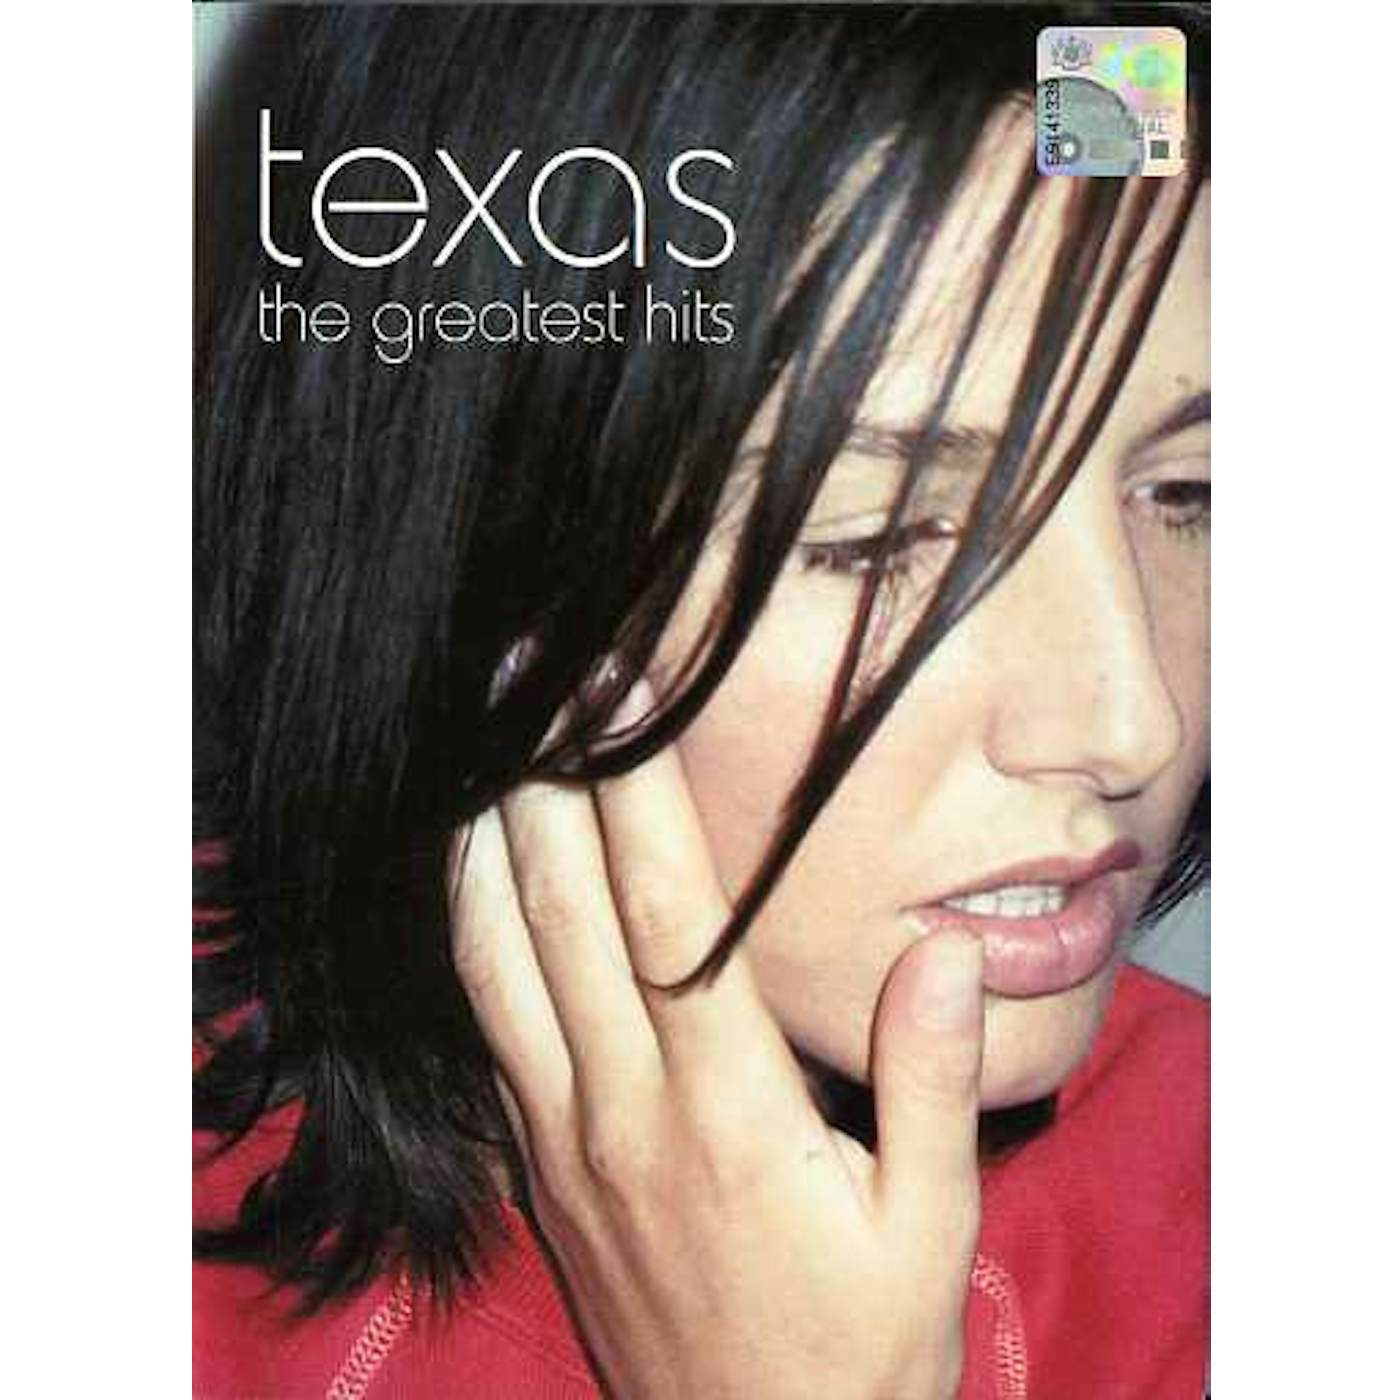 Texas GREATEST HITS: DELUXE SOUND & VISION CD